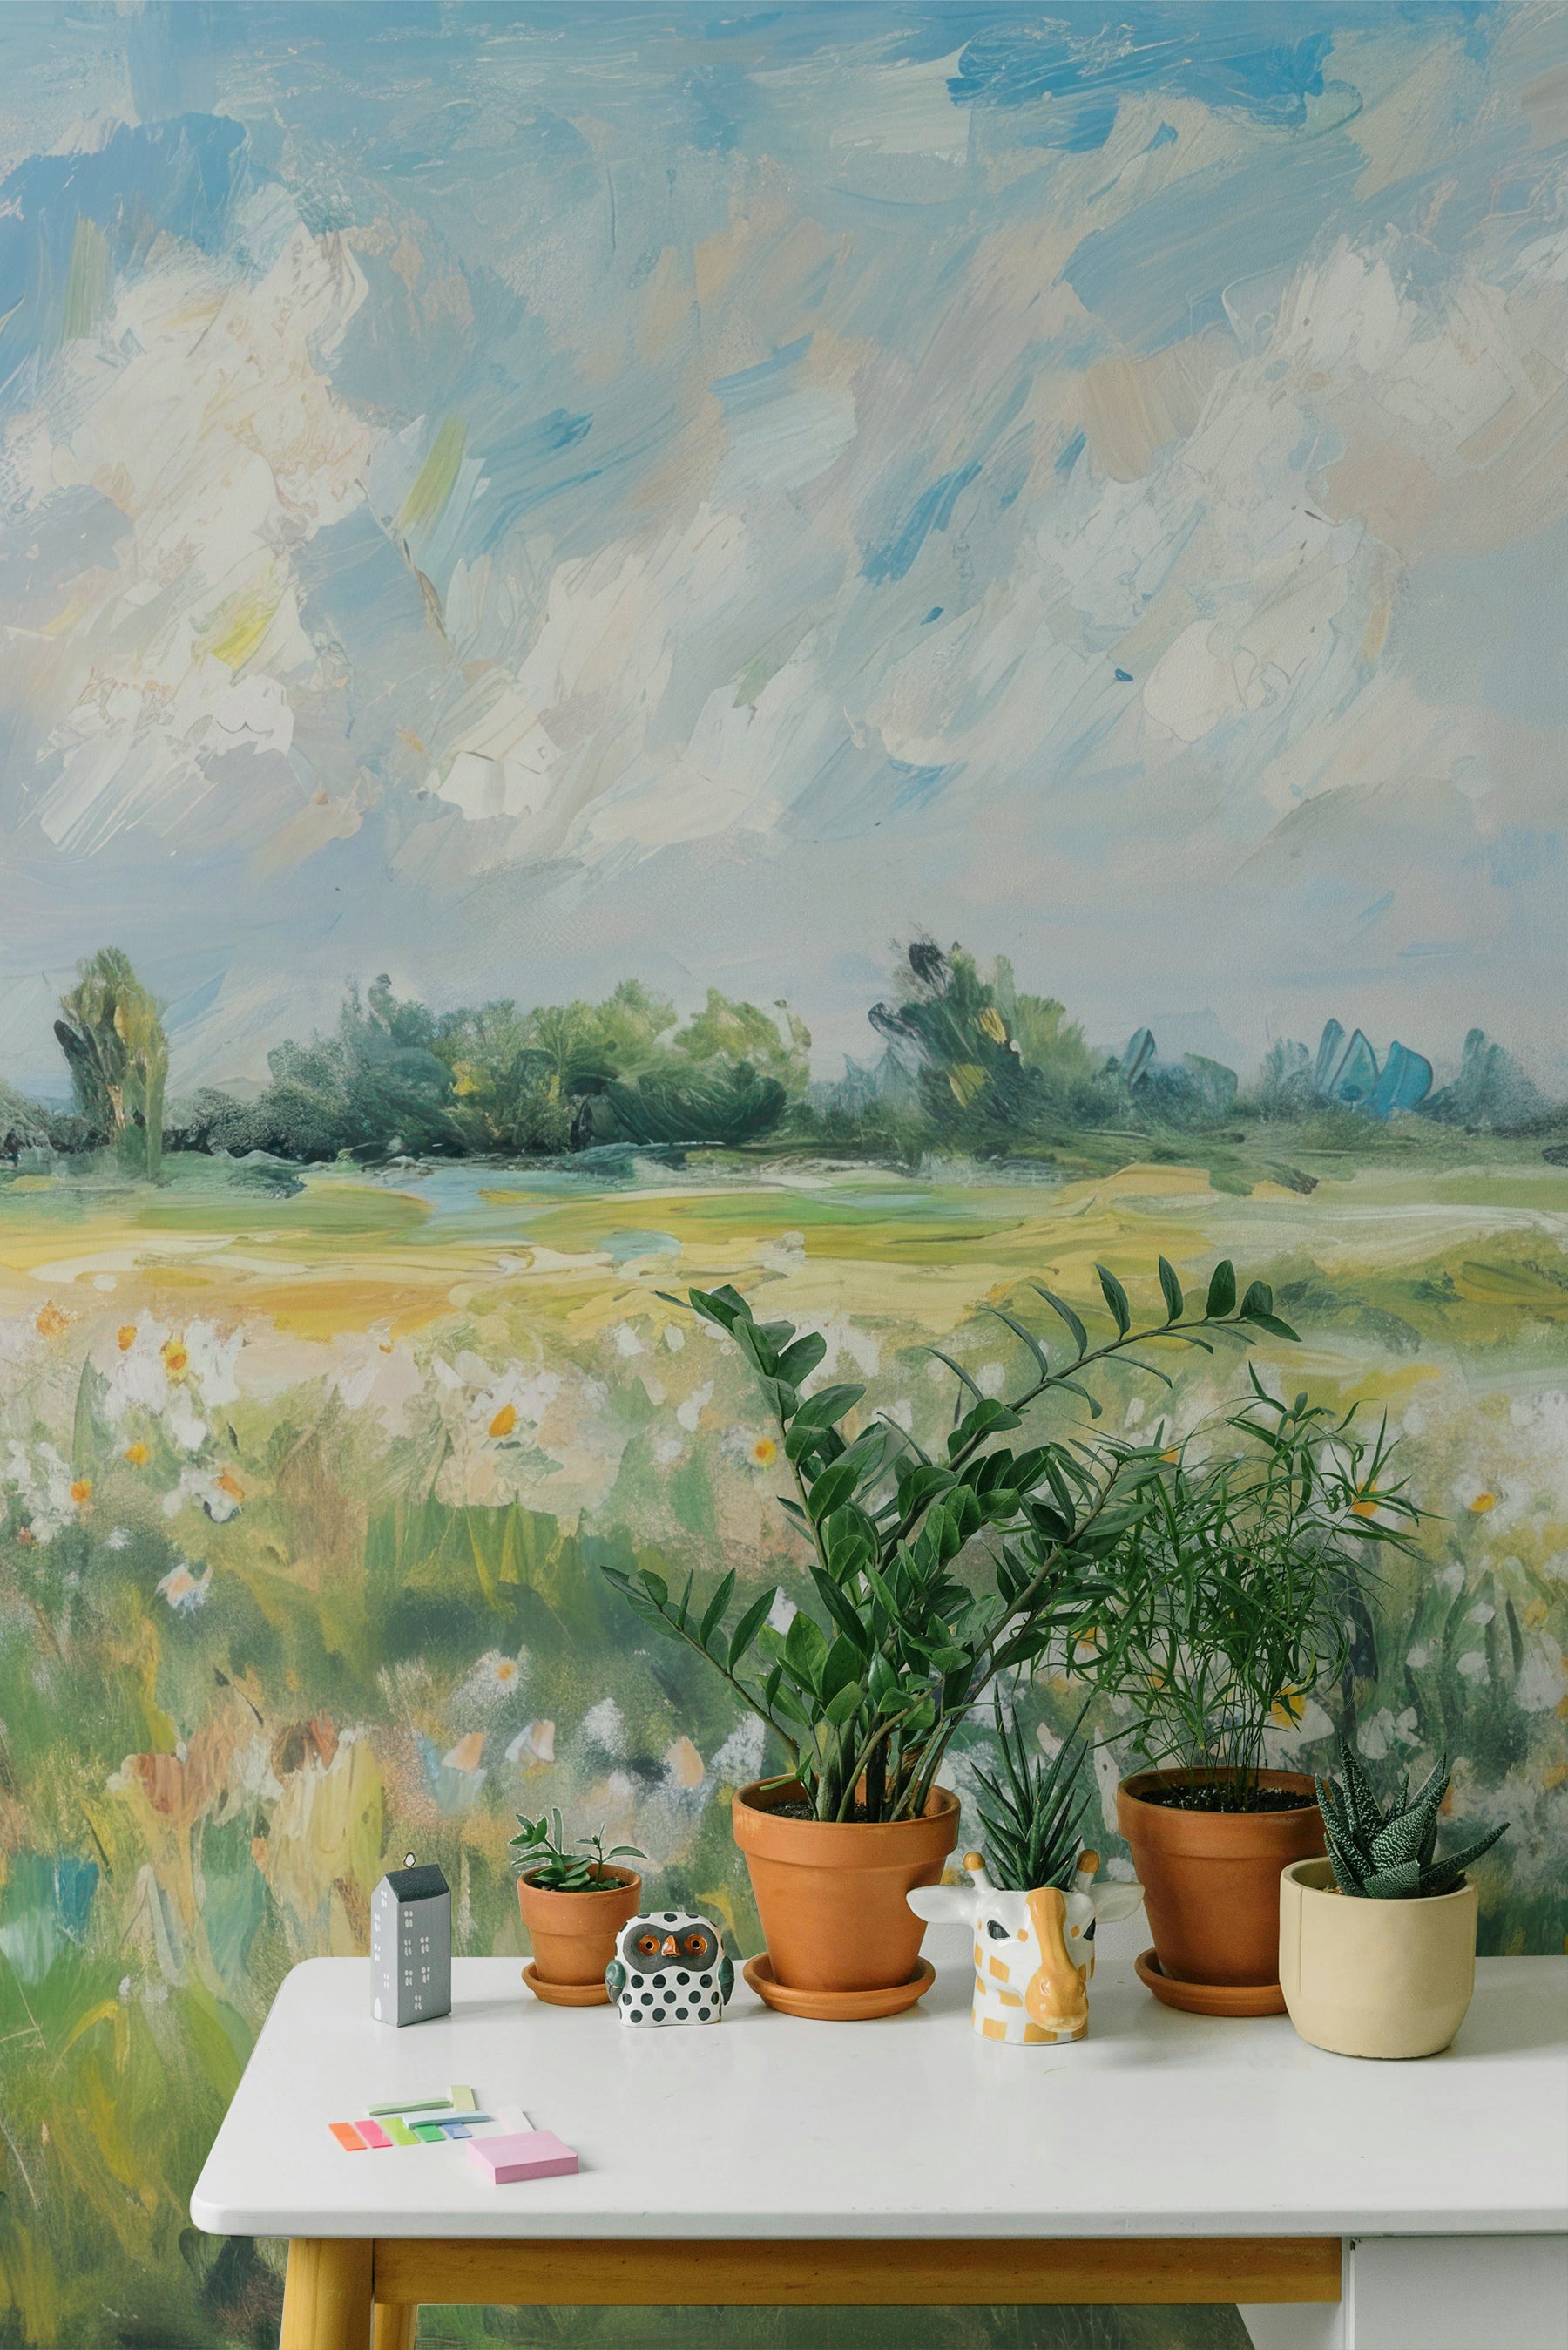 Close-up of the Impressionist mural wallpaper in a room decorated with potted plants, highlighting the delicate details of the meadow and the soft, pastel-colored sky.